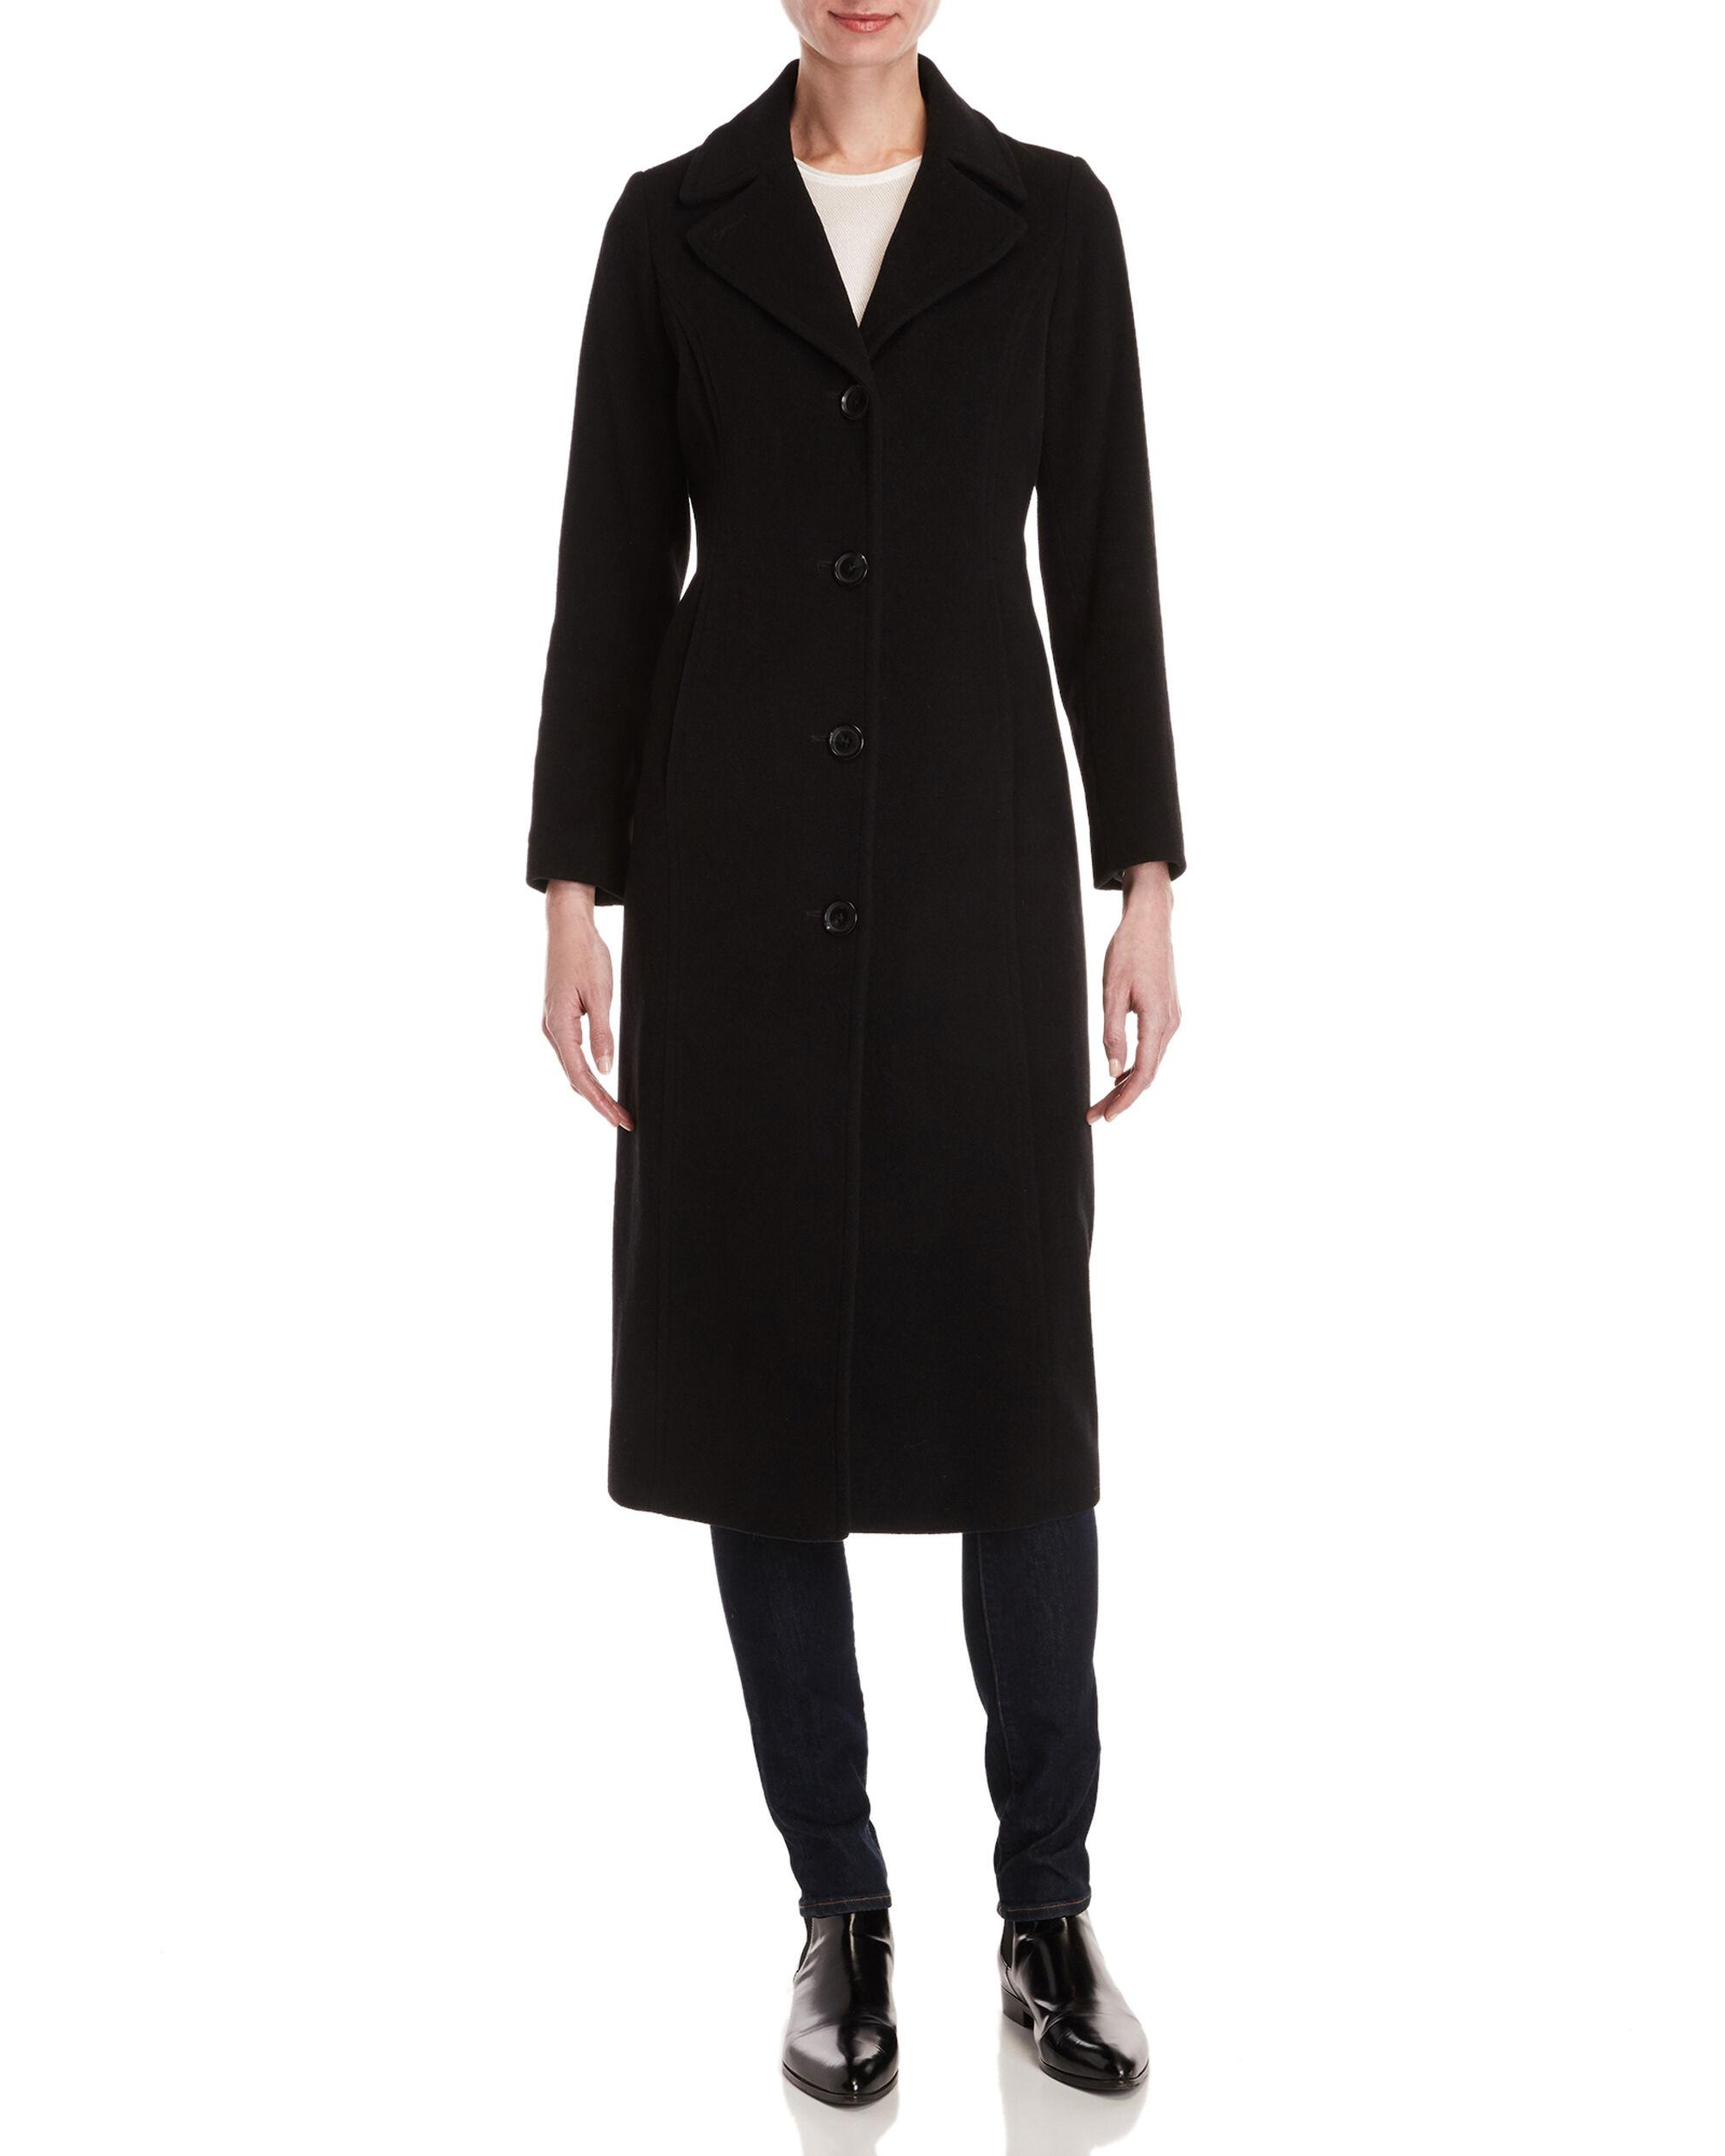 Anne Klein Wool Petite Notched Collar Long Coat in Black - Lyst